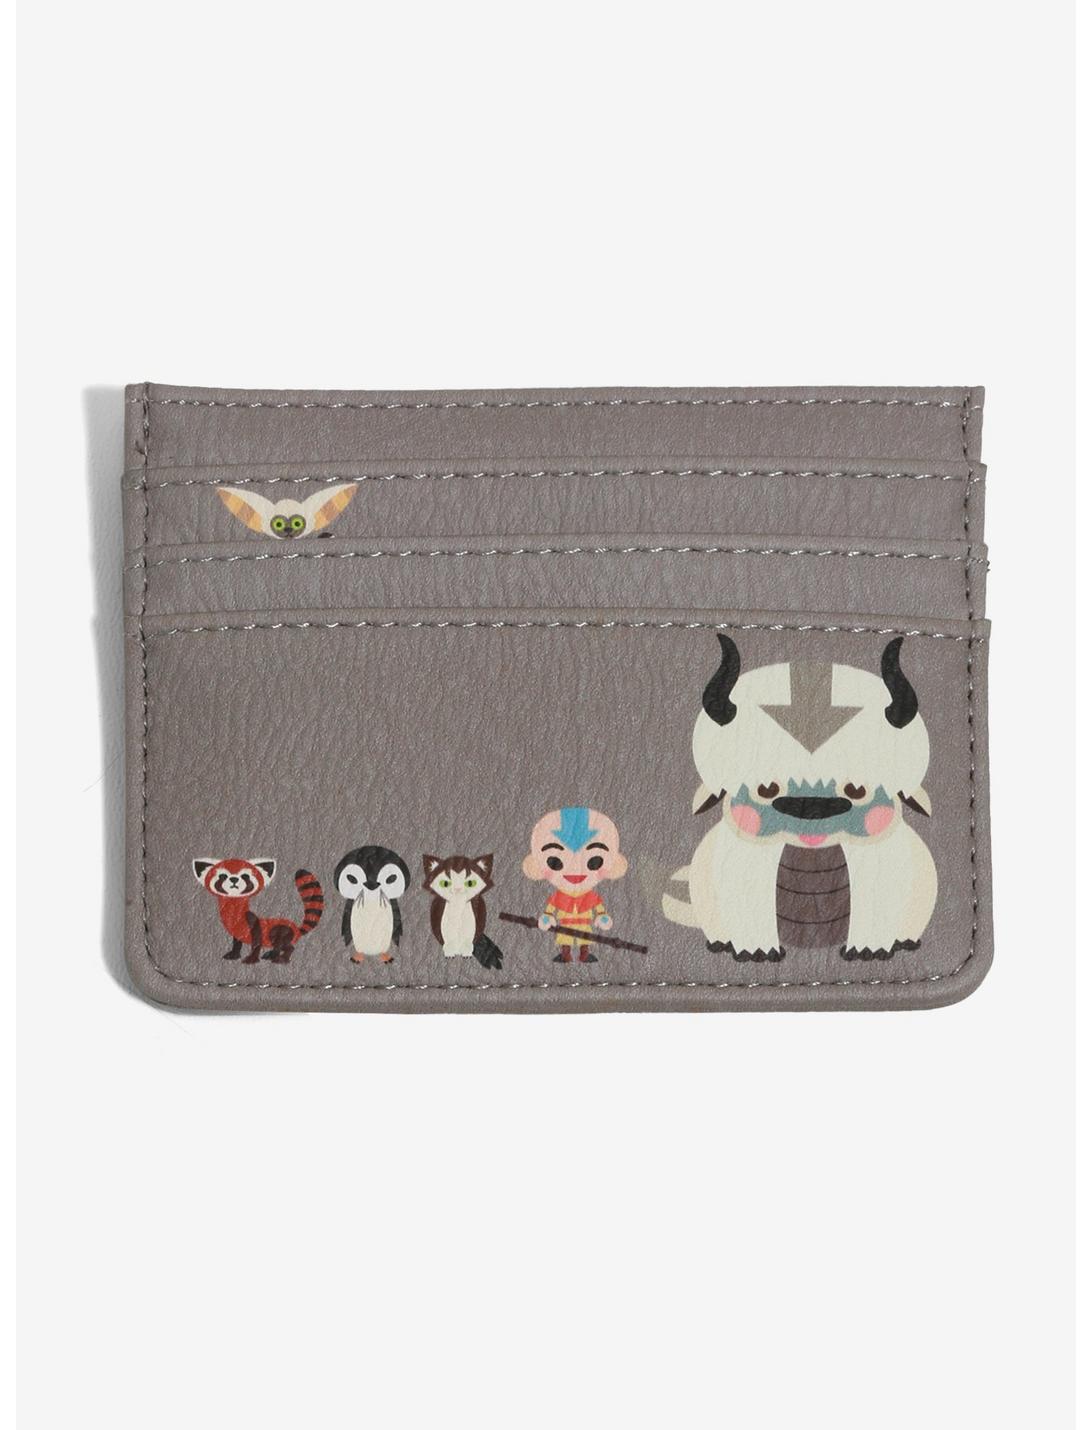 Avatar: The Last Airbender Chibi Cardholder - BoxLunch Exclusive, , hi-res